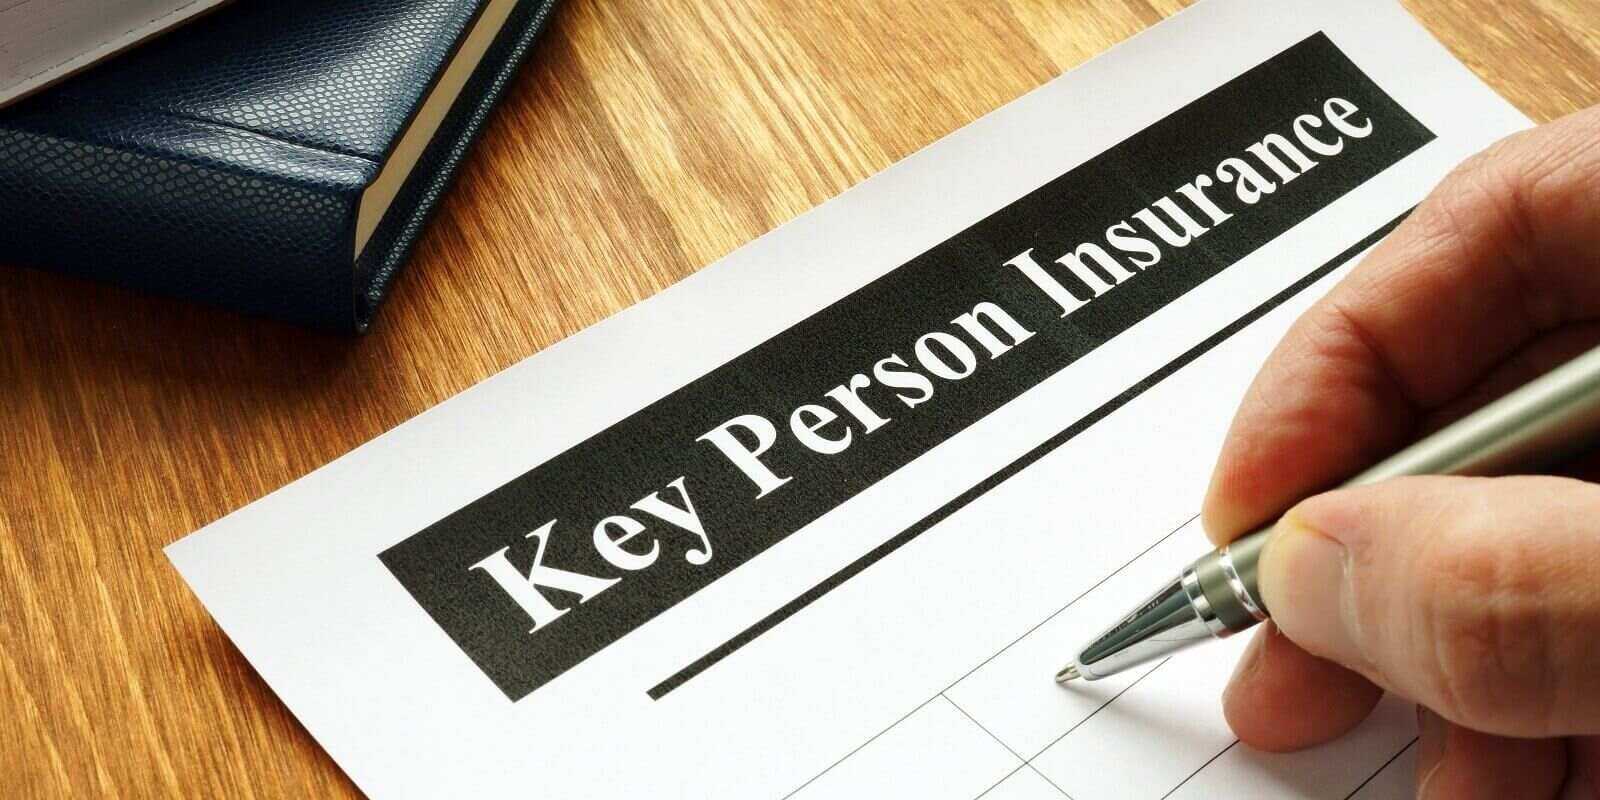 key person Insurance policy agreement on table